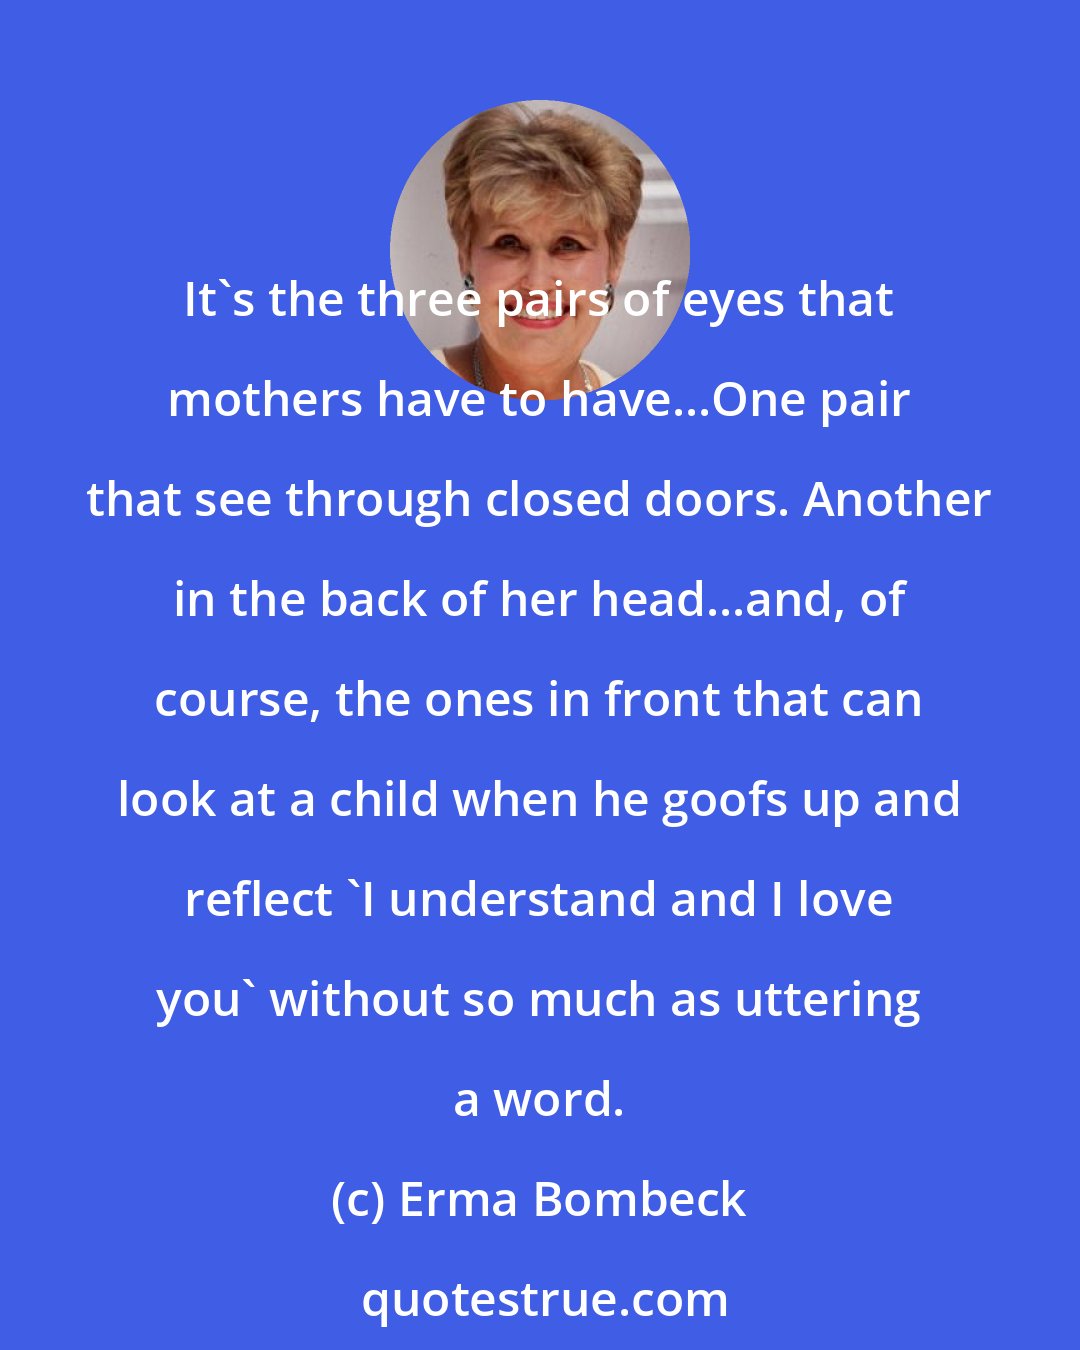 Erma Bombeck: It's the three pairs of eyes that mothers have to have...One pair that see through closed doors. Another in the back of her head...and, of course, the ones in front that can look at a child when he goofs up and reflect 'I understand and I love you' without so much as uttering a word.